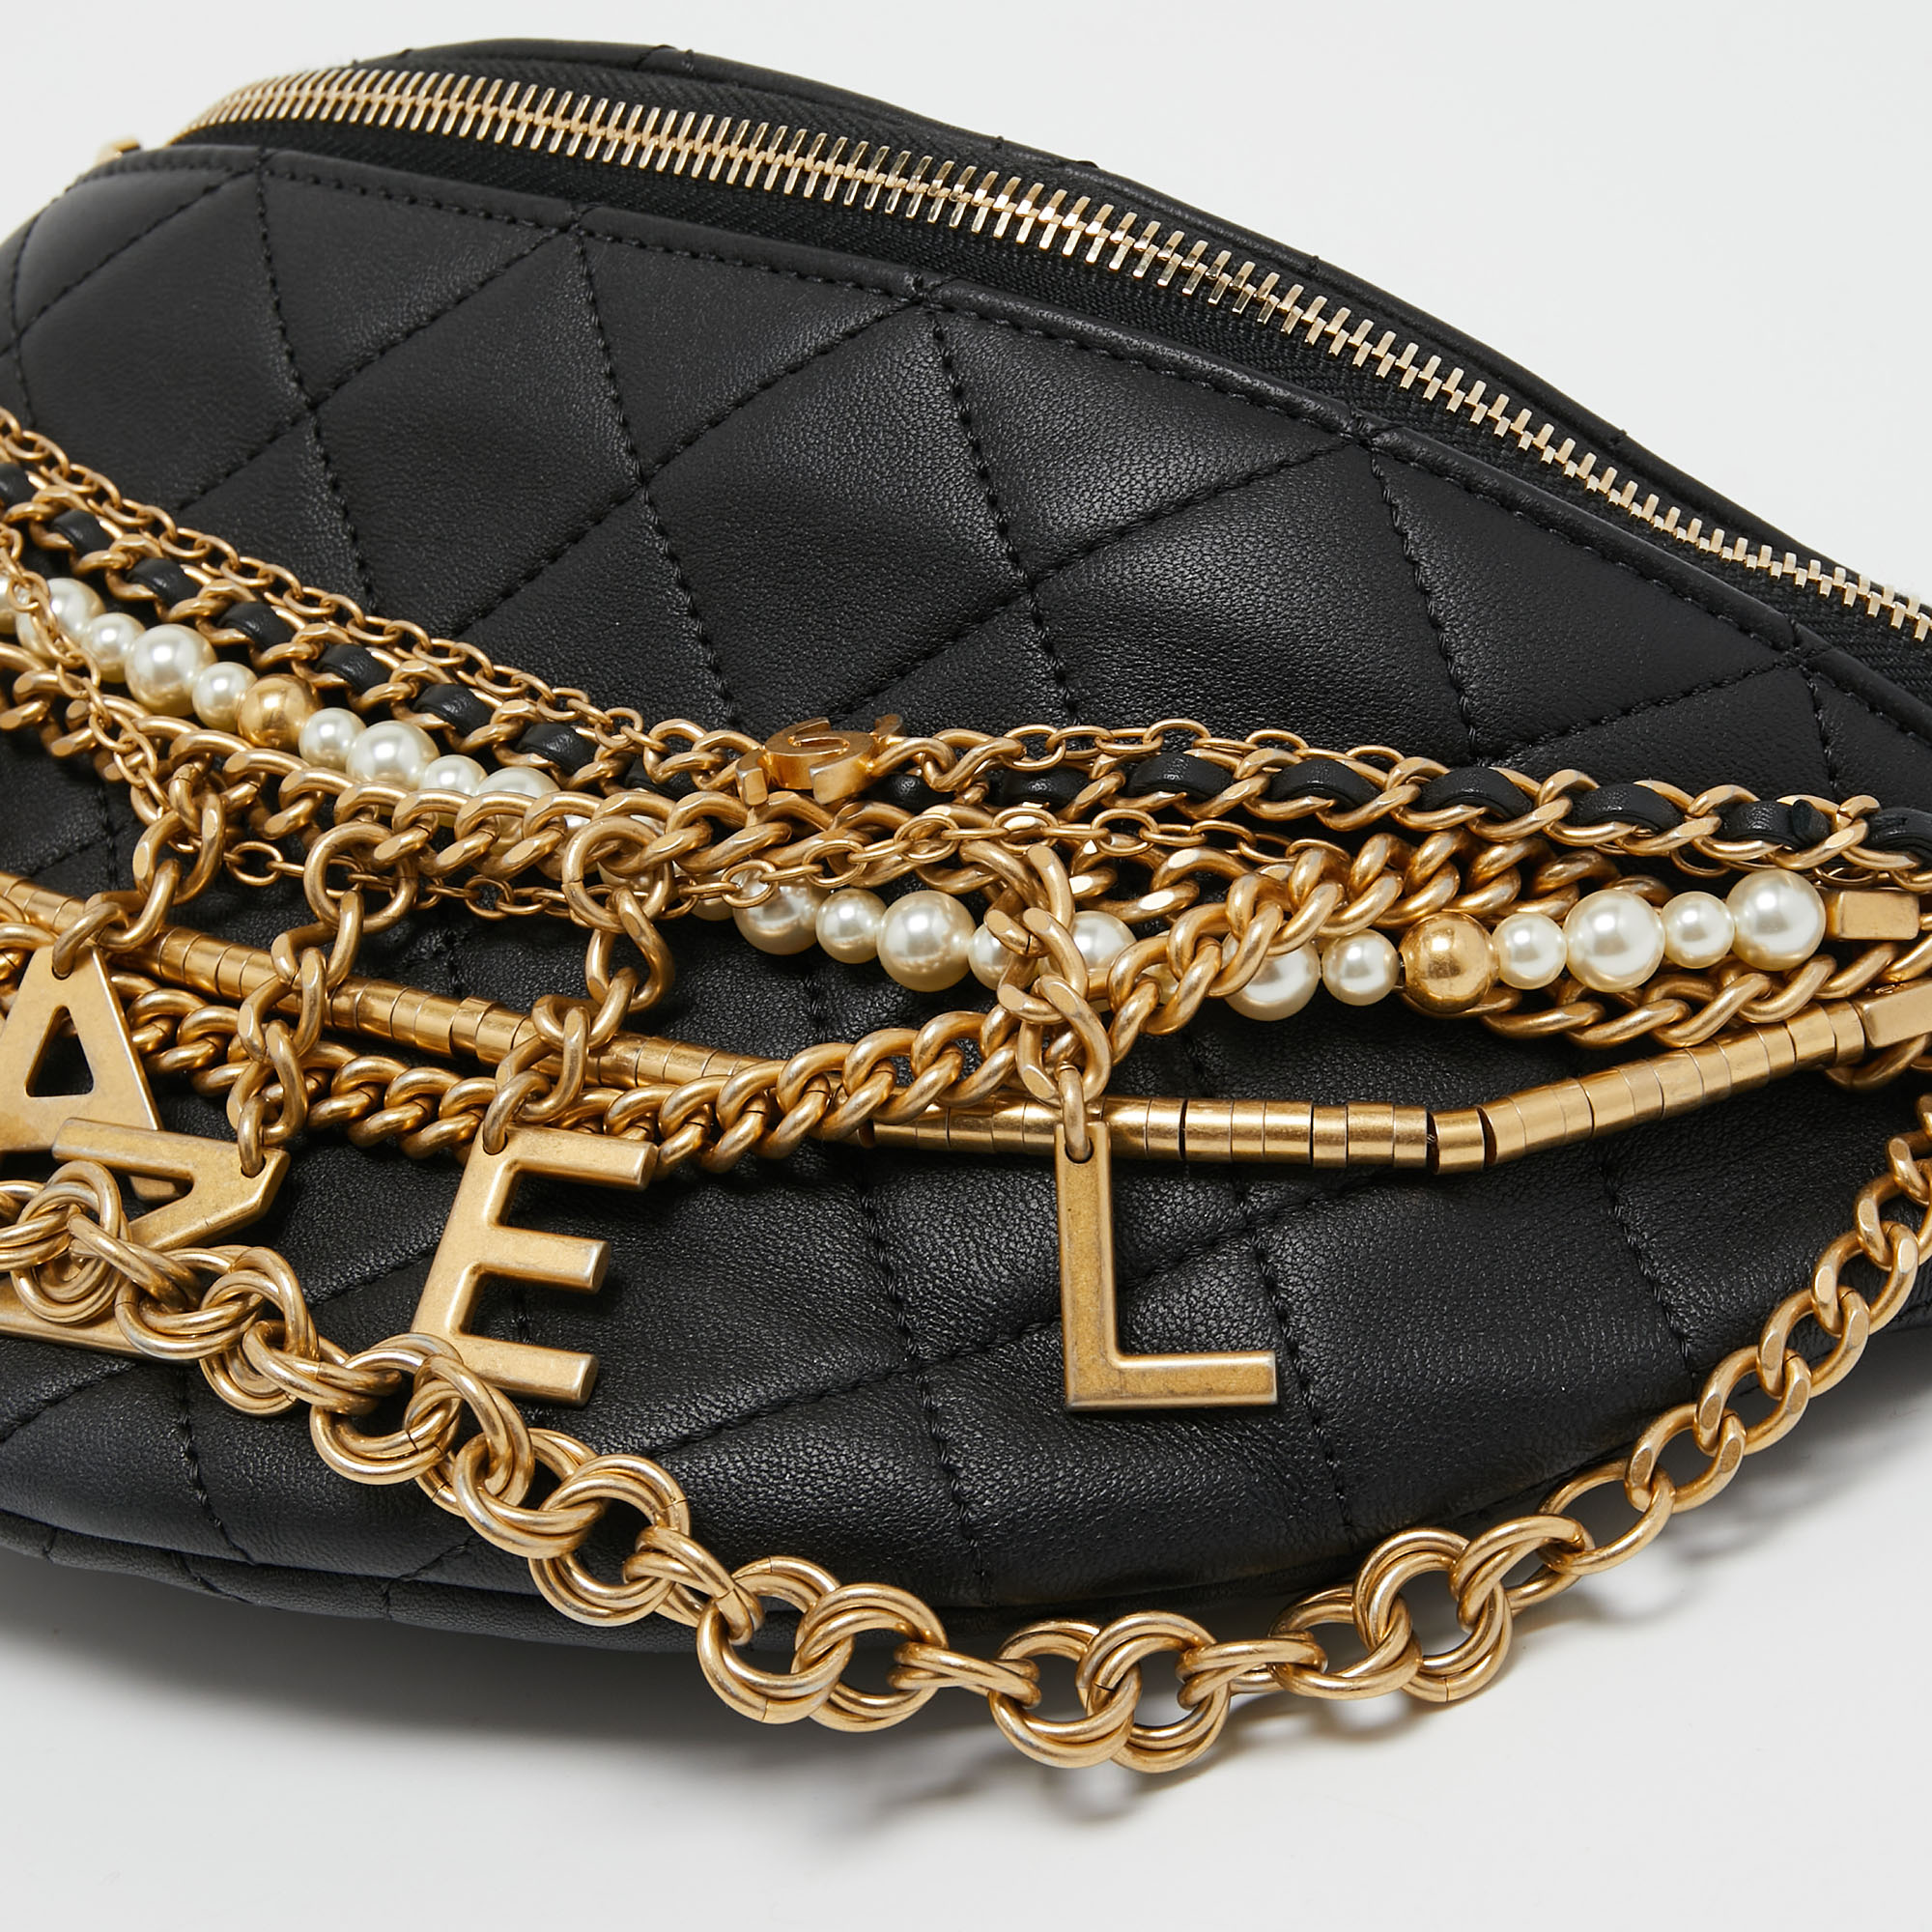 Chanel Black Quilted Leather All About Chains Waist Bag Chanel